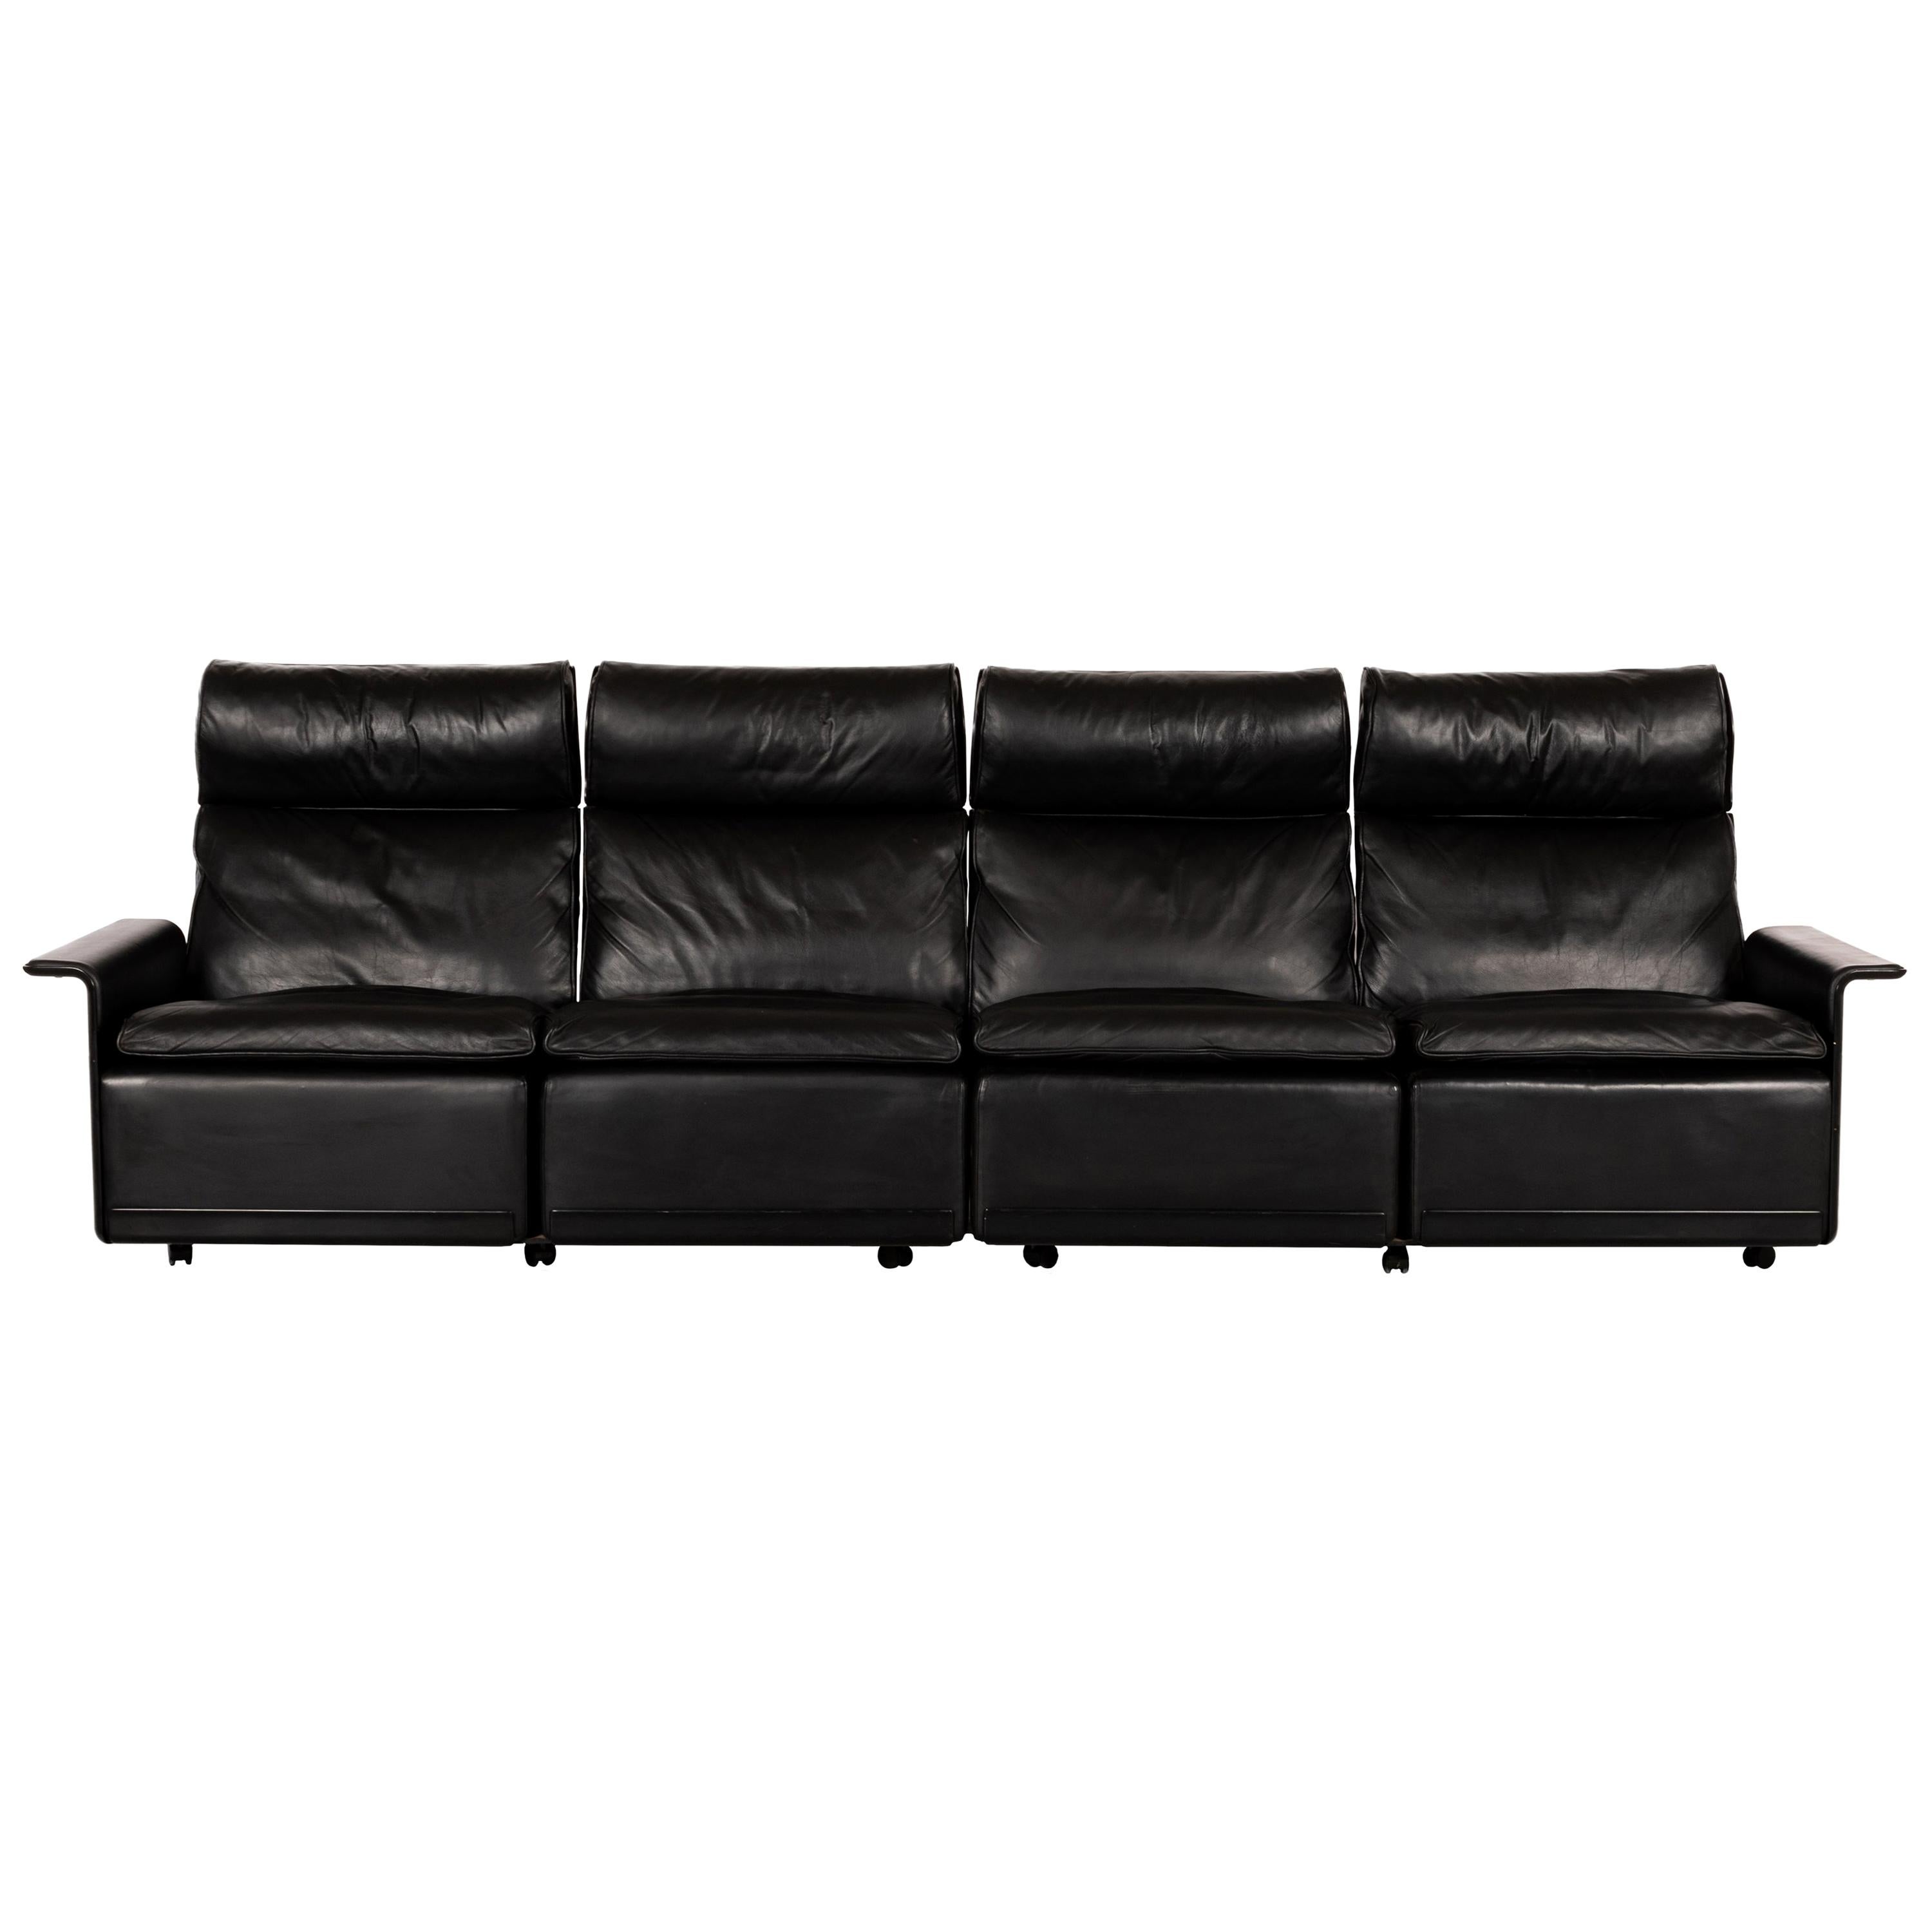 Dieder Rams sofa Model 620 High back and black leather for Vitsoe